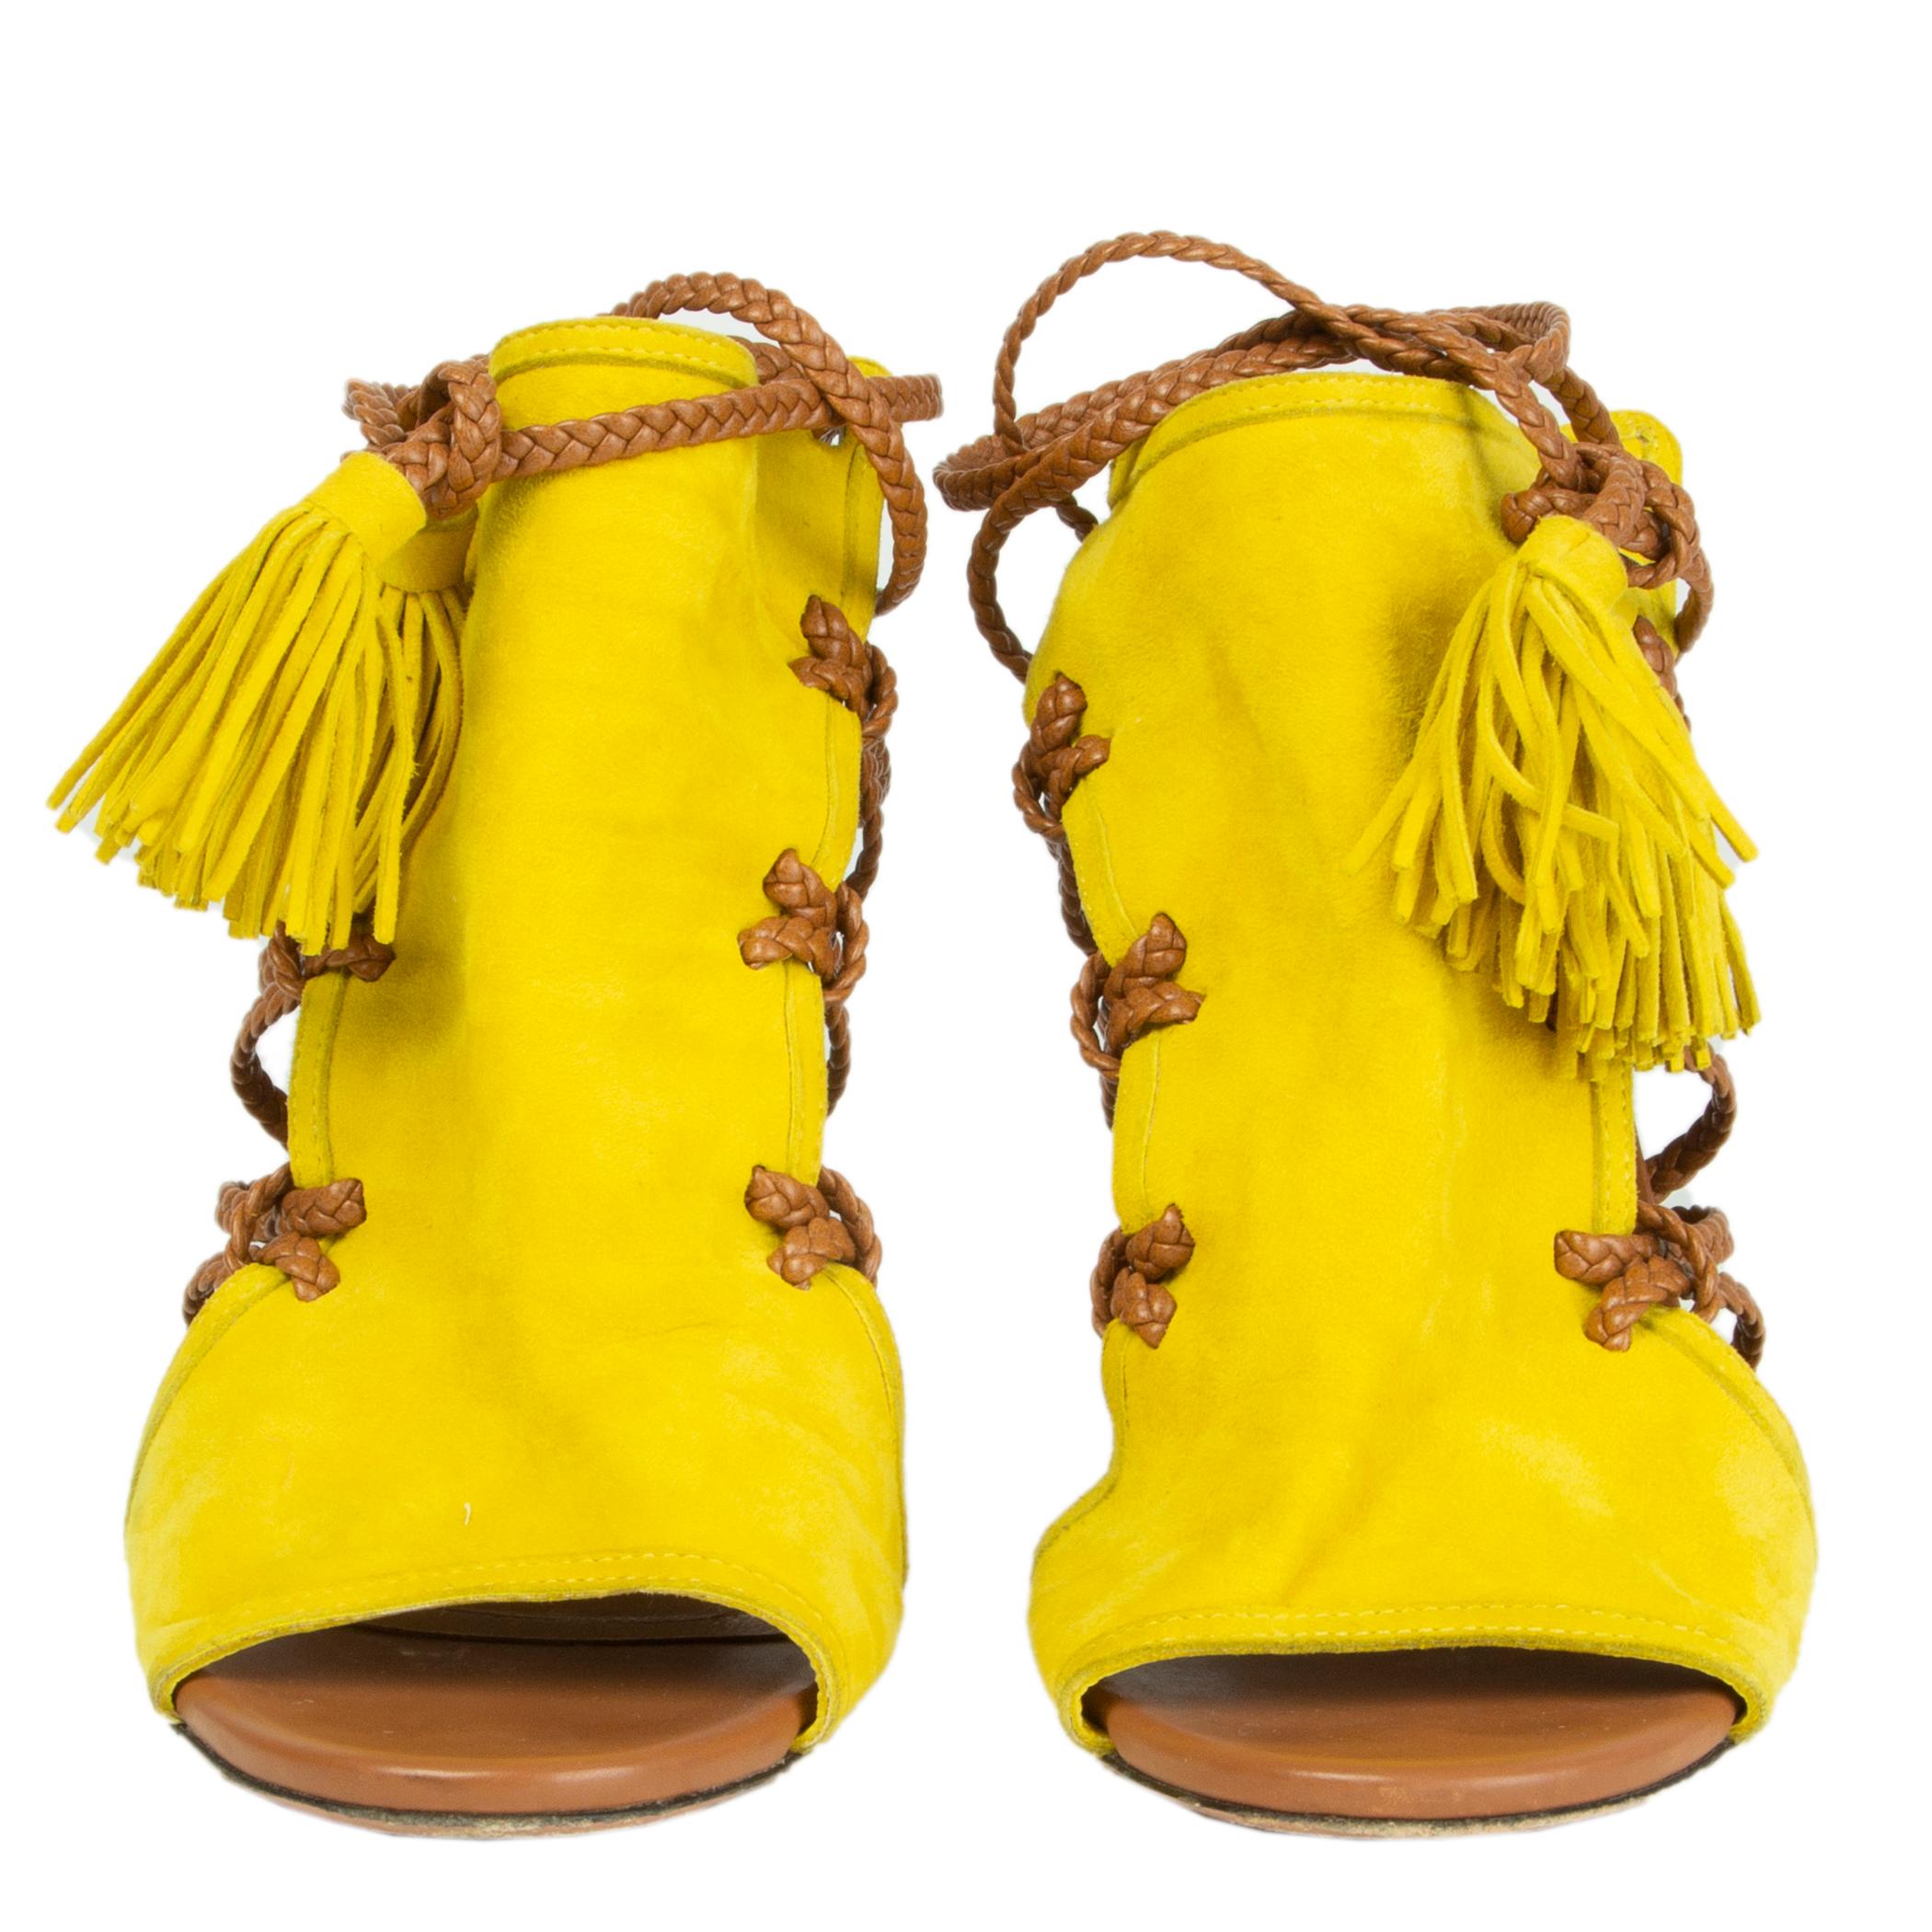 100% authentic Aquazzura 'Sahara' braided lace sandals in yellow suede and dark camel calfskin. Have been worn and are in excellent condition. 

Measurements
Imprinted Size	38
Shoe Size	38
Inside Sole	24.5cm (9.6in)
Width	7.5cm (2.9in)
Heel	11.5cm